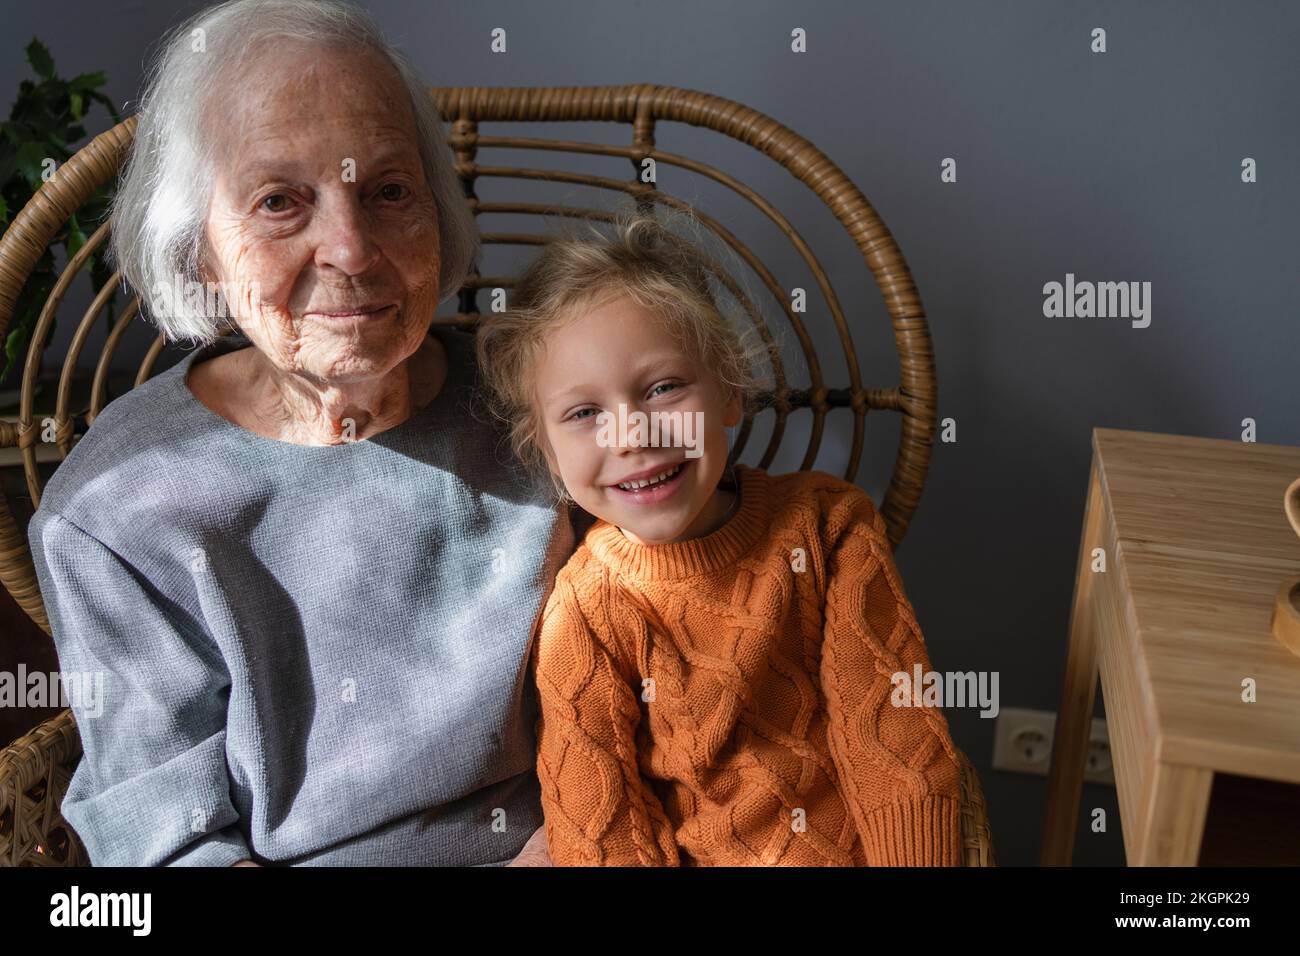 Smiling senior woman with granddaughter on chair at home Stock Photo